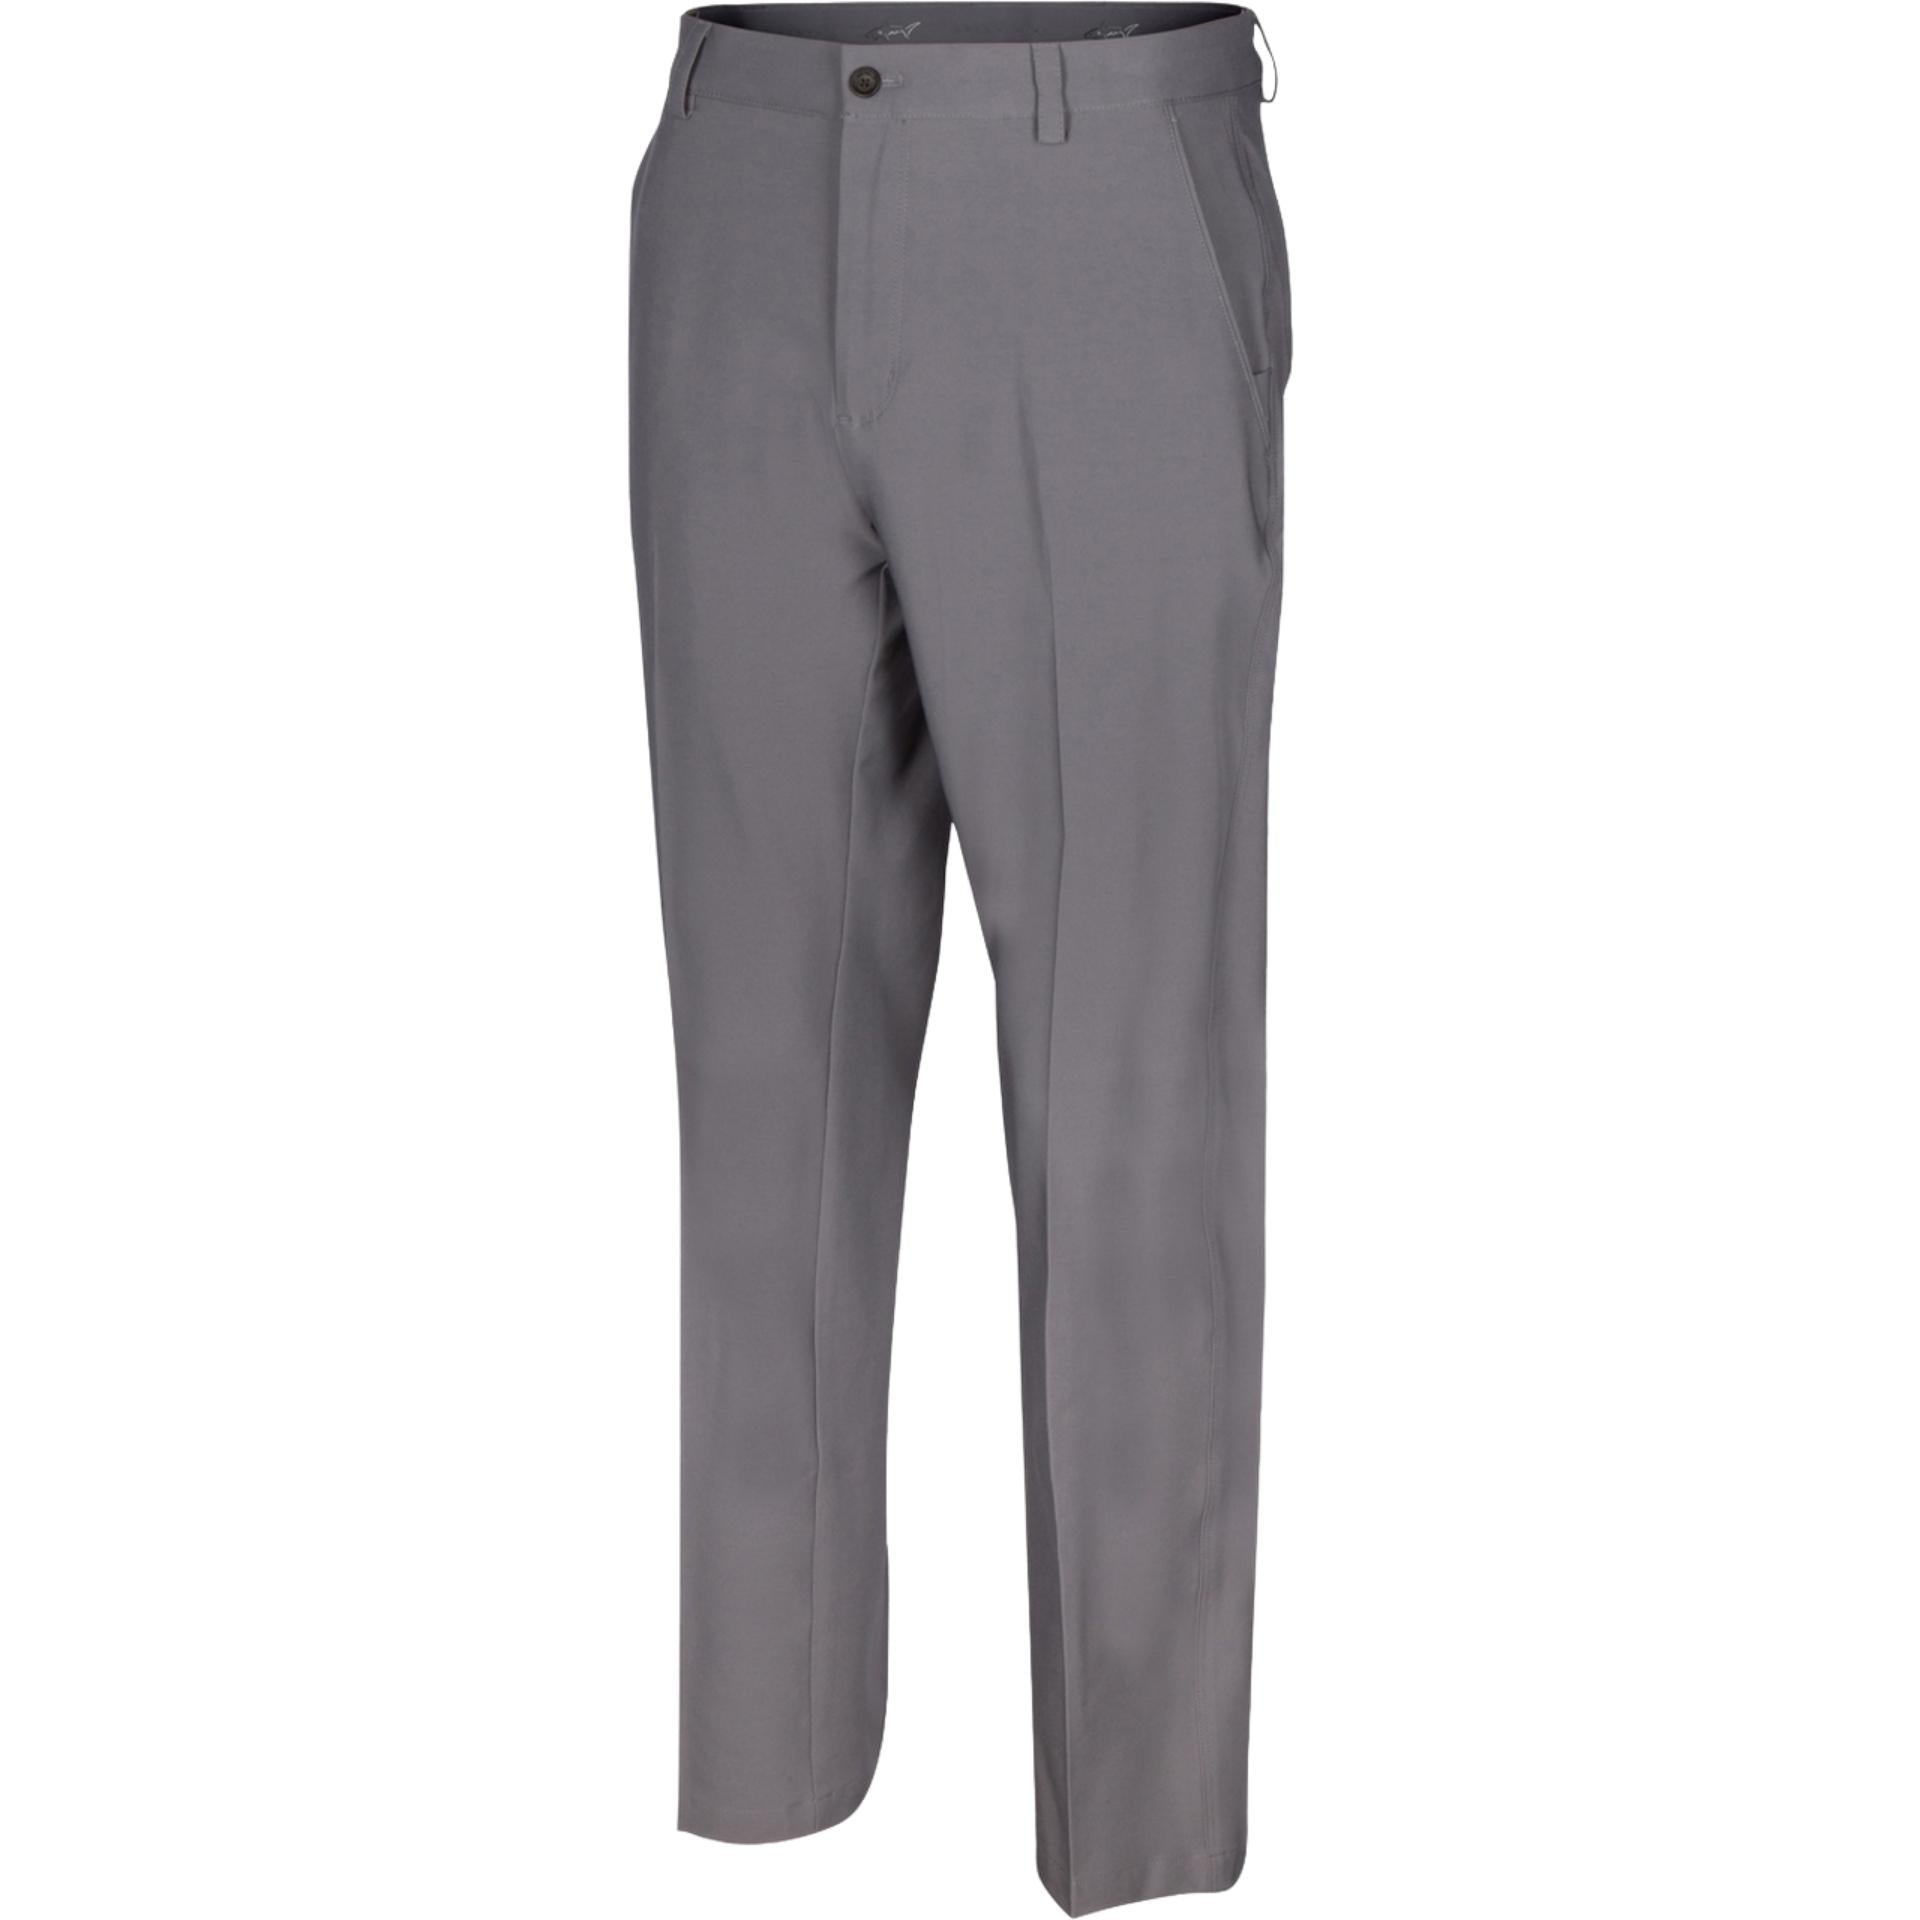 The Greg Norman Ultimate 5 Pocket Lightweight Travel Pant, Golf Trousers |  eBay